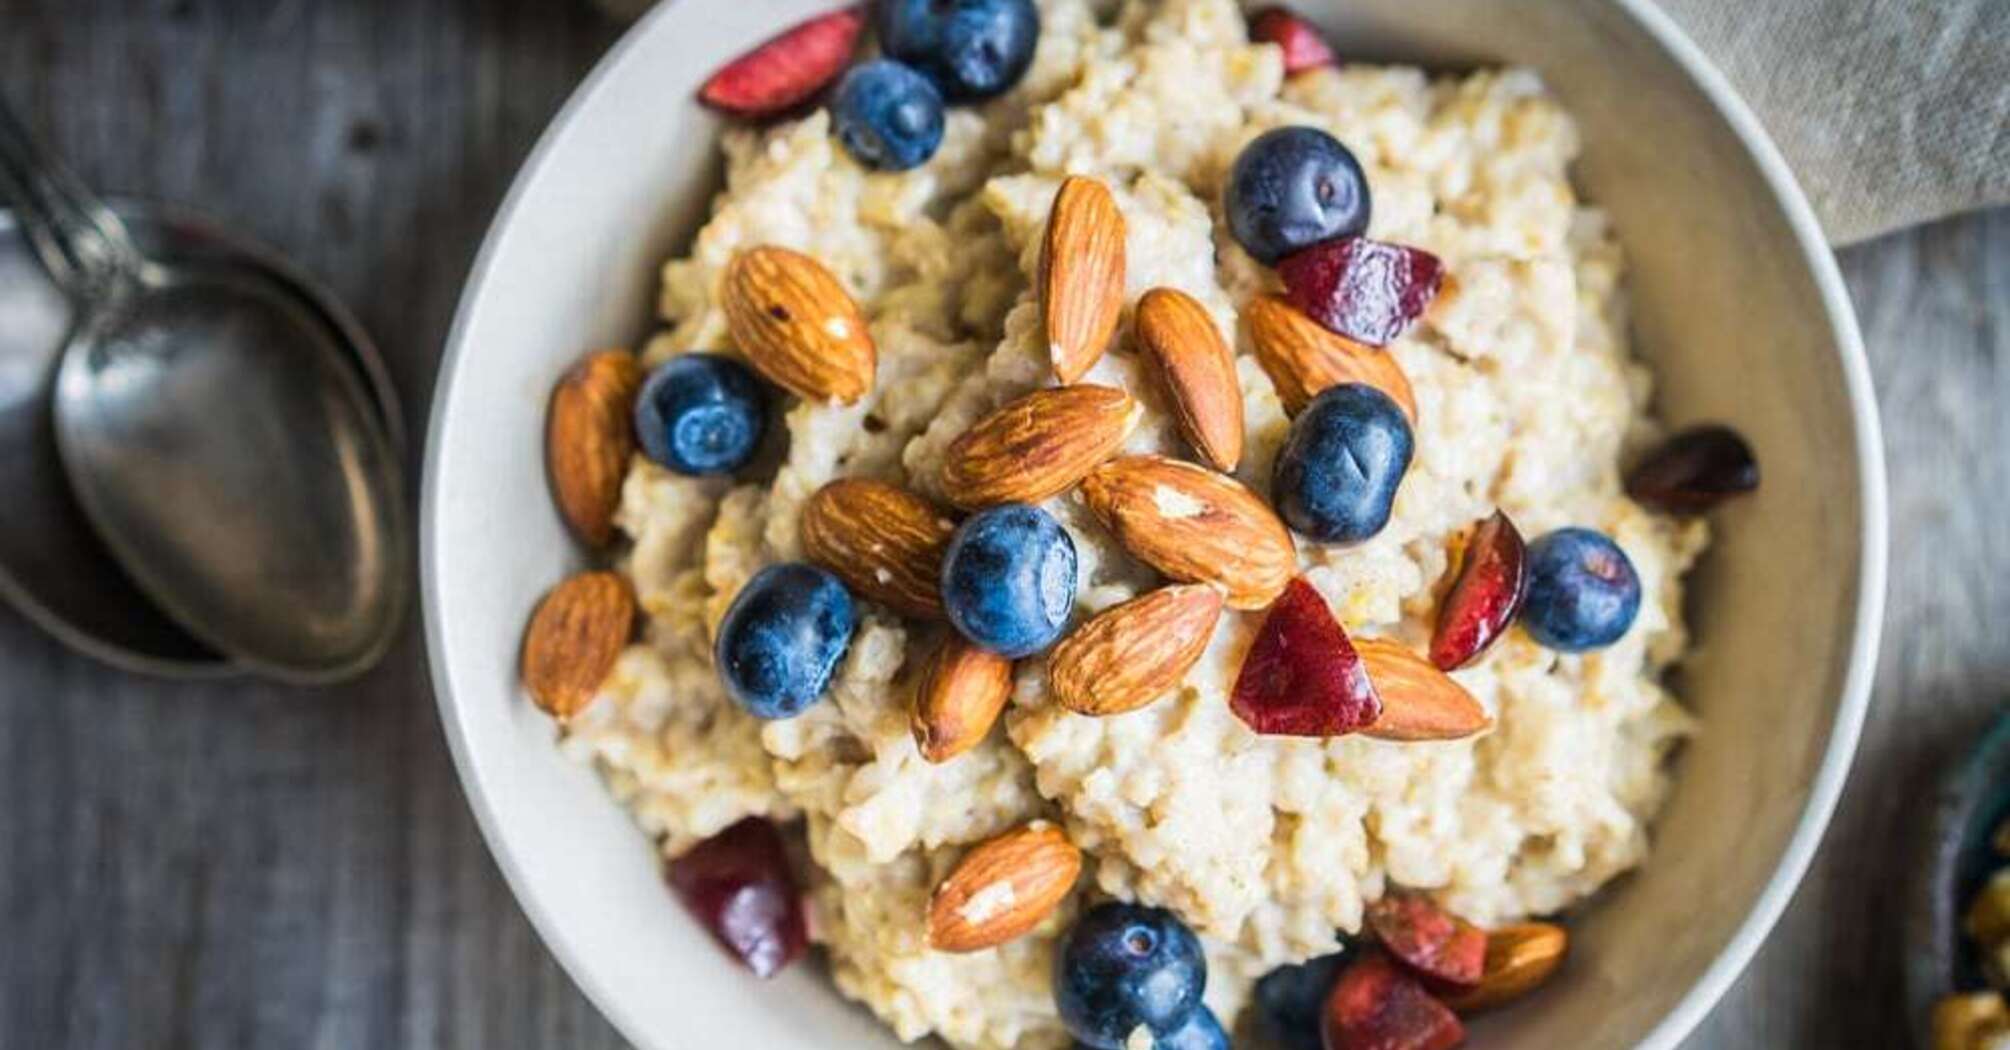 Why oatmeal is good for breakfast